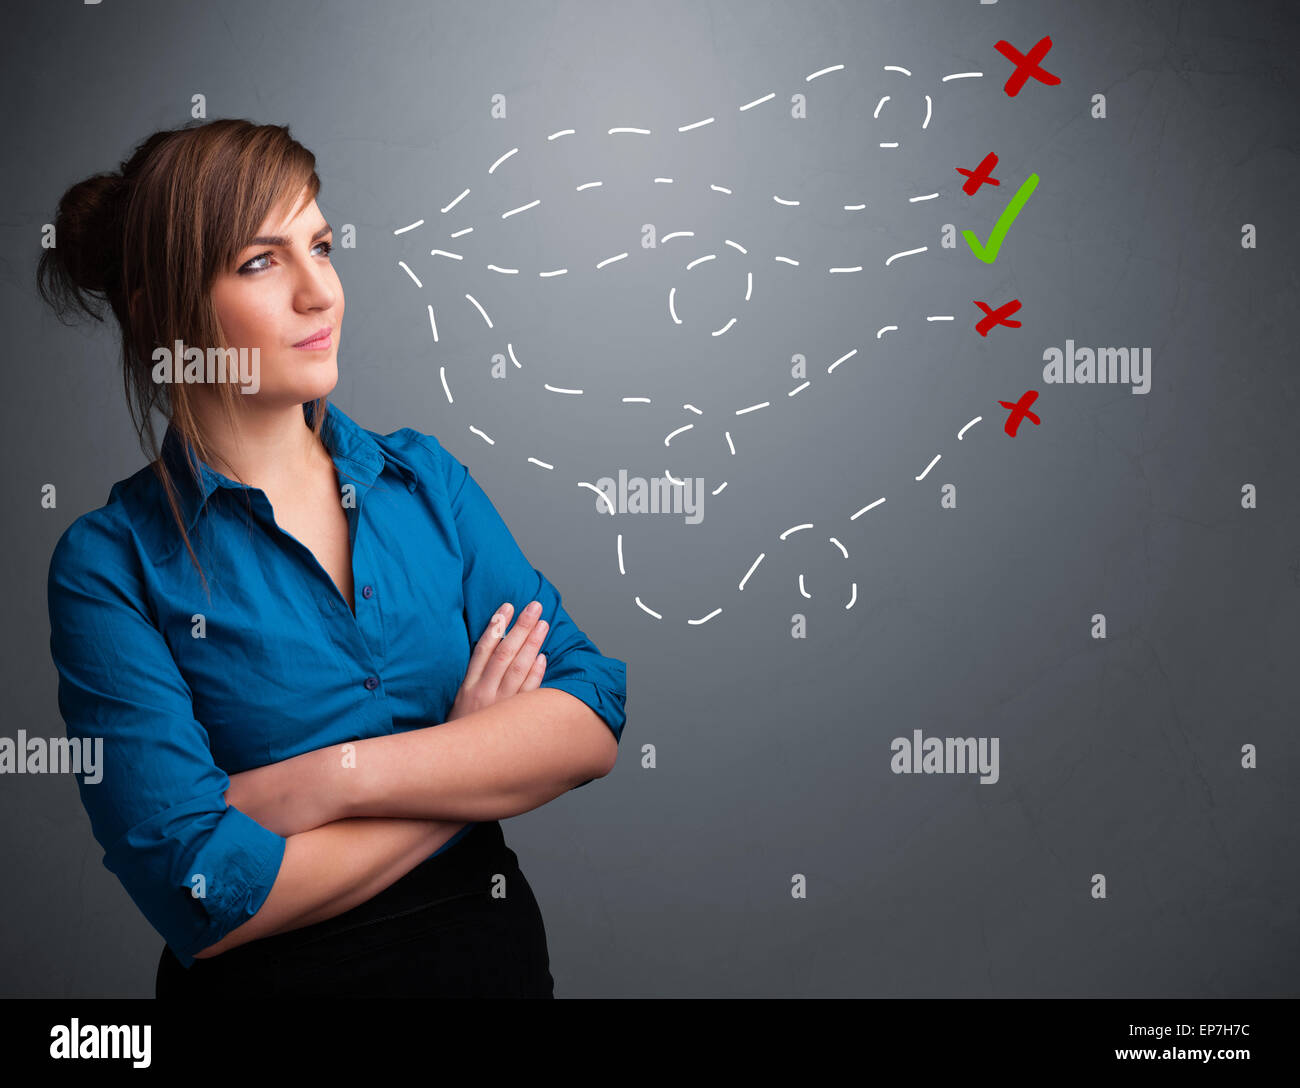 Young woman choosing between right and wrong signs Stock Photo